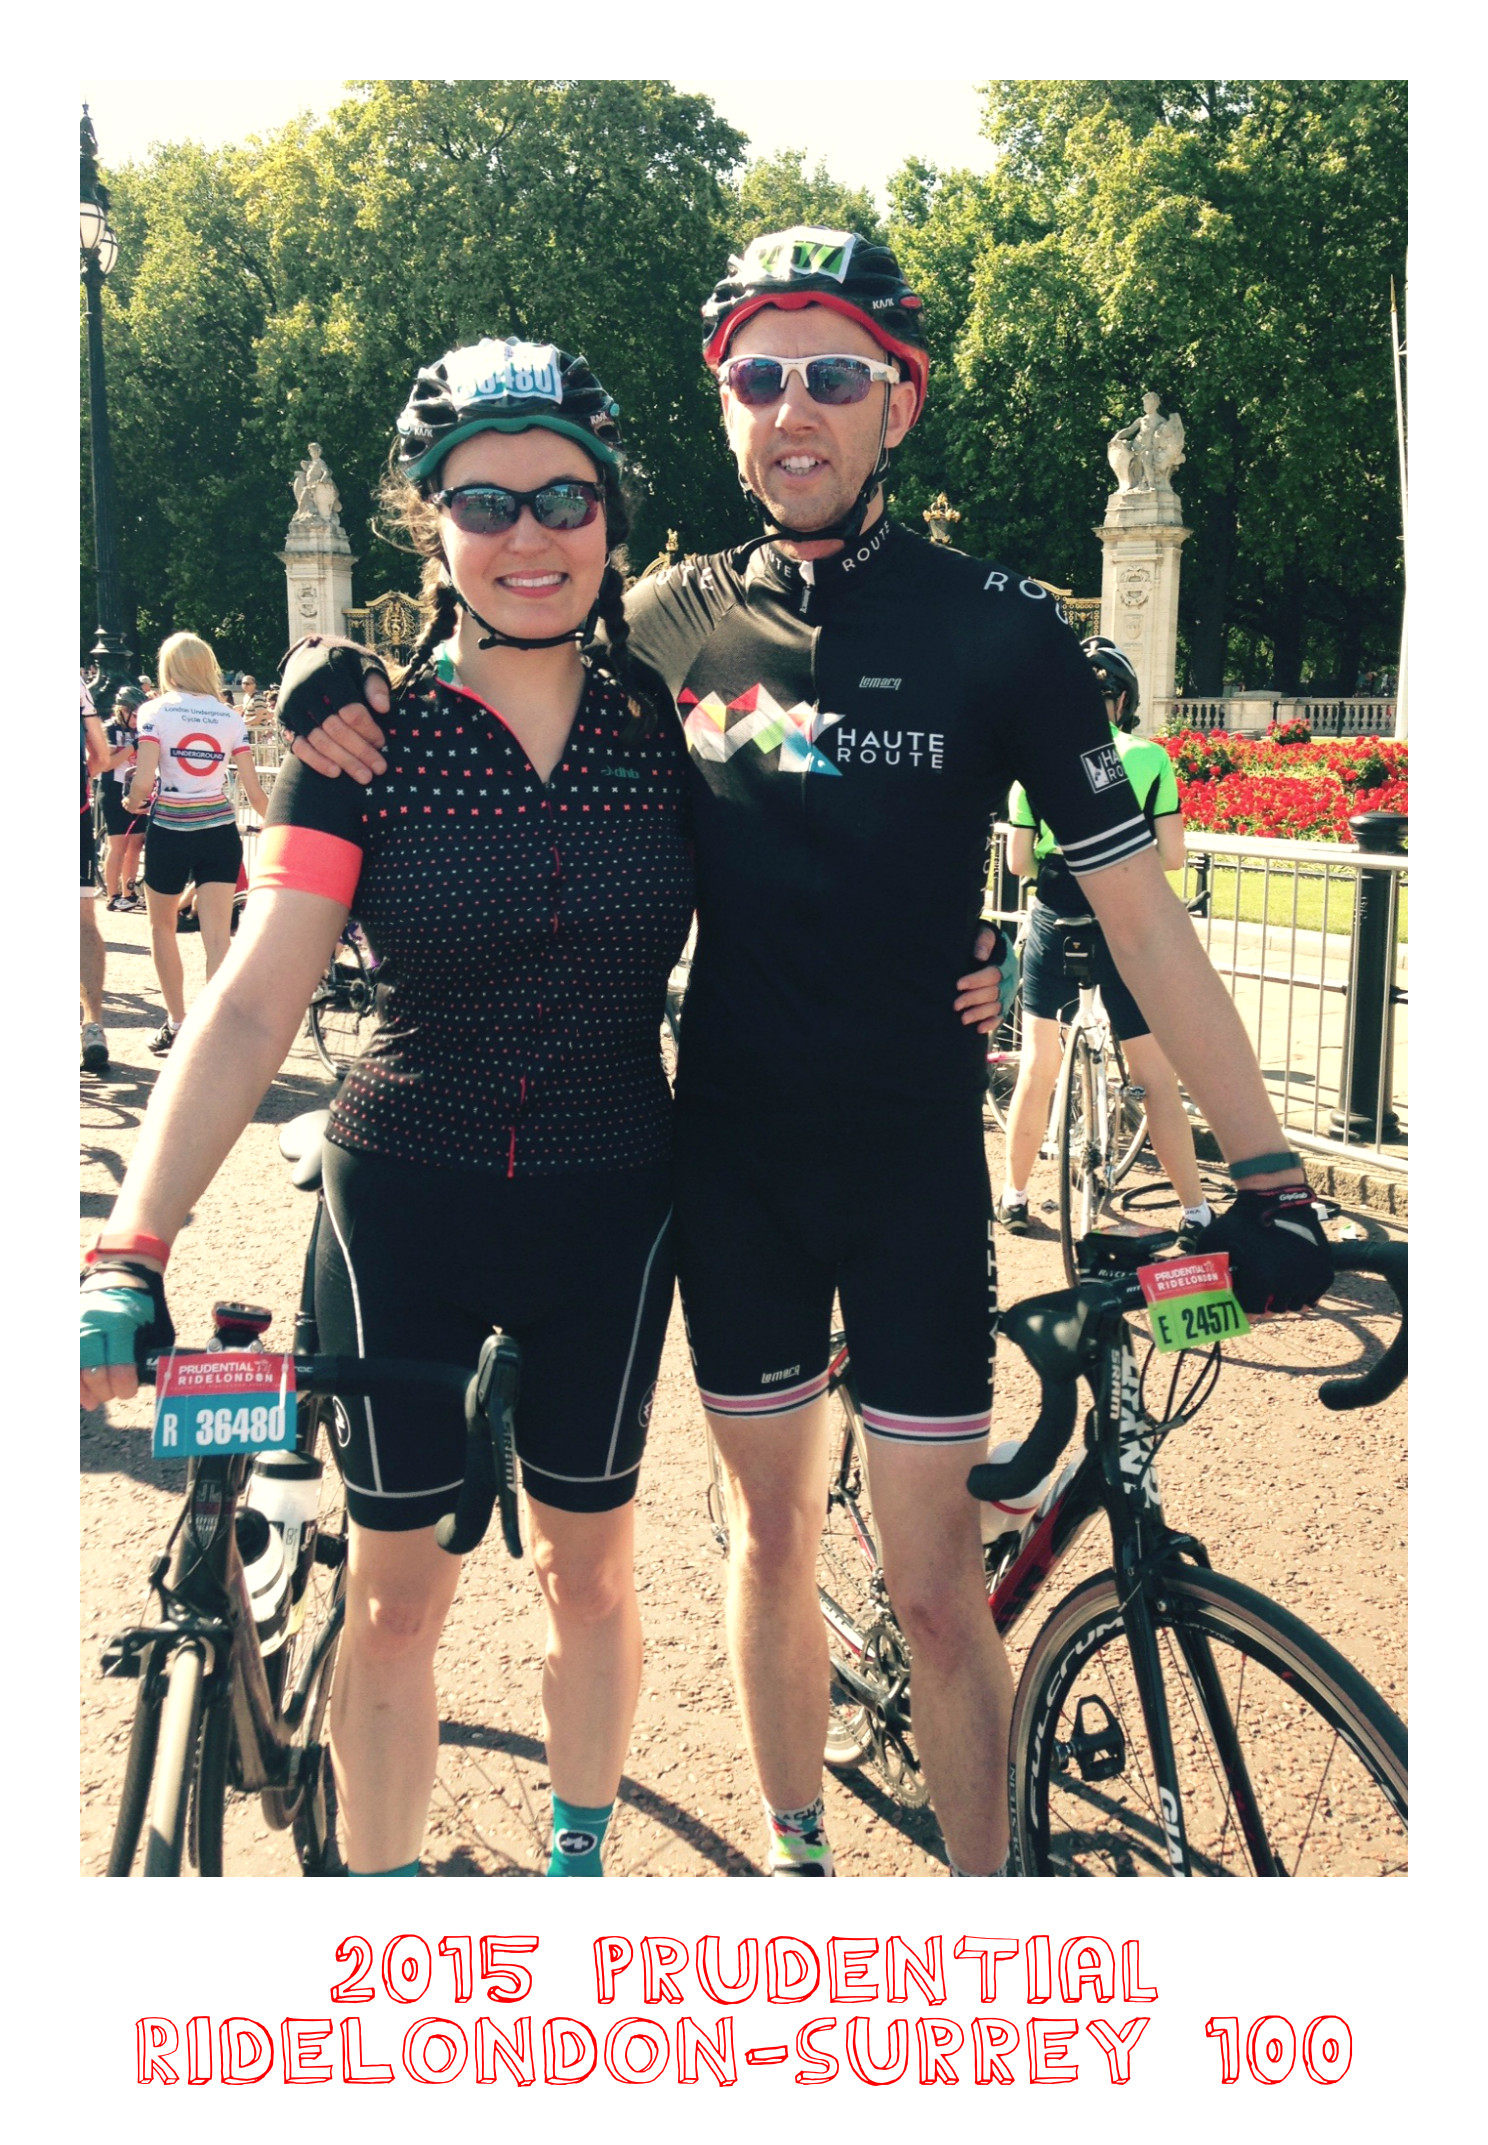 One of the greatest days of my life - completing the Prudential RideLondon-Surrey 100 with Matt.